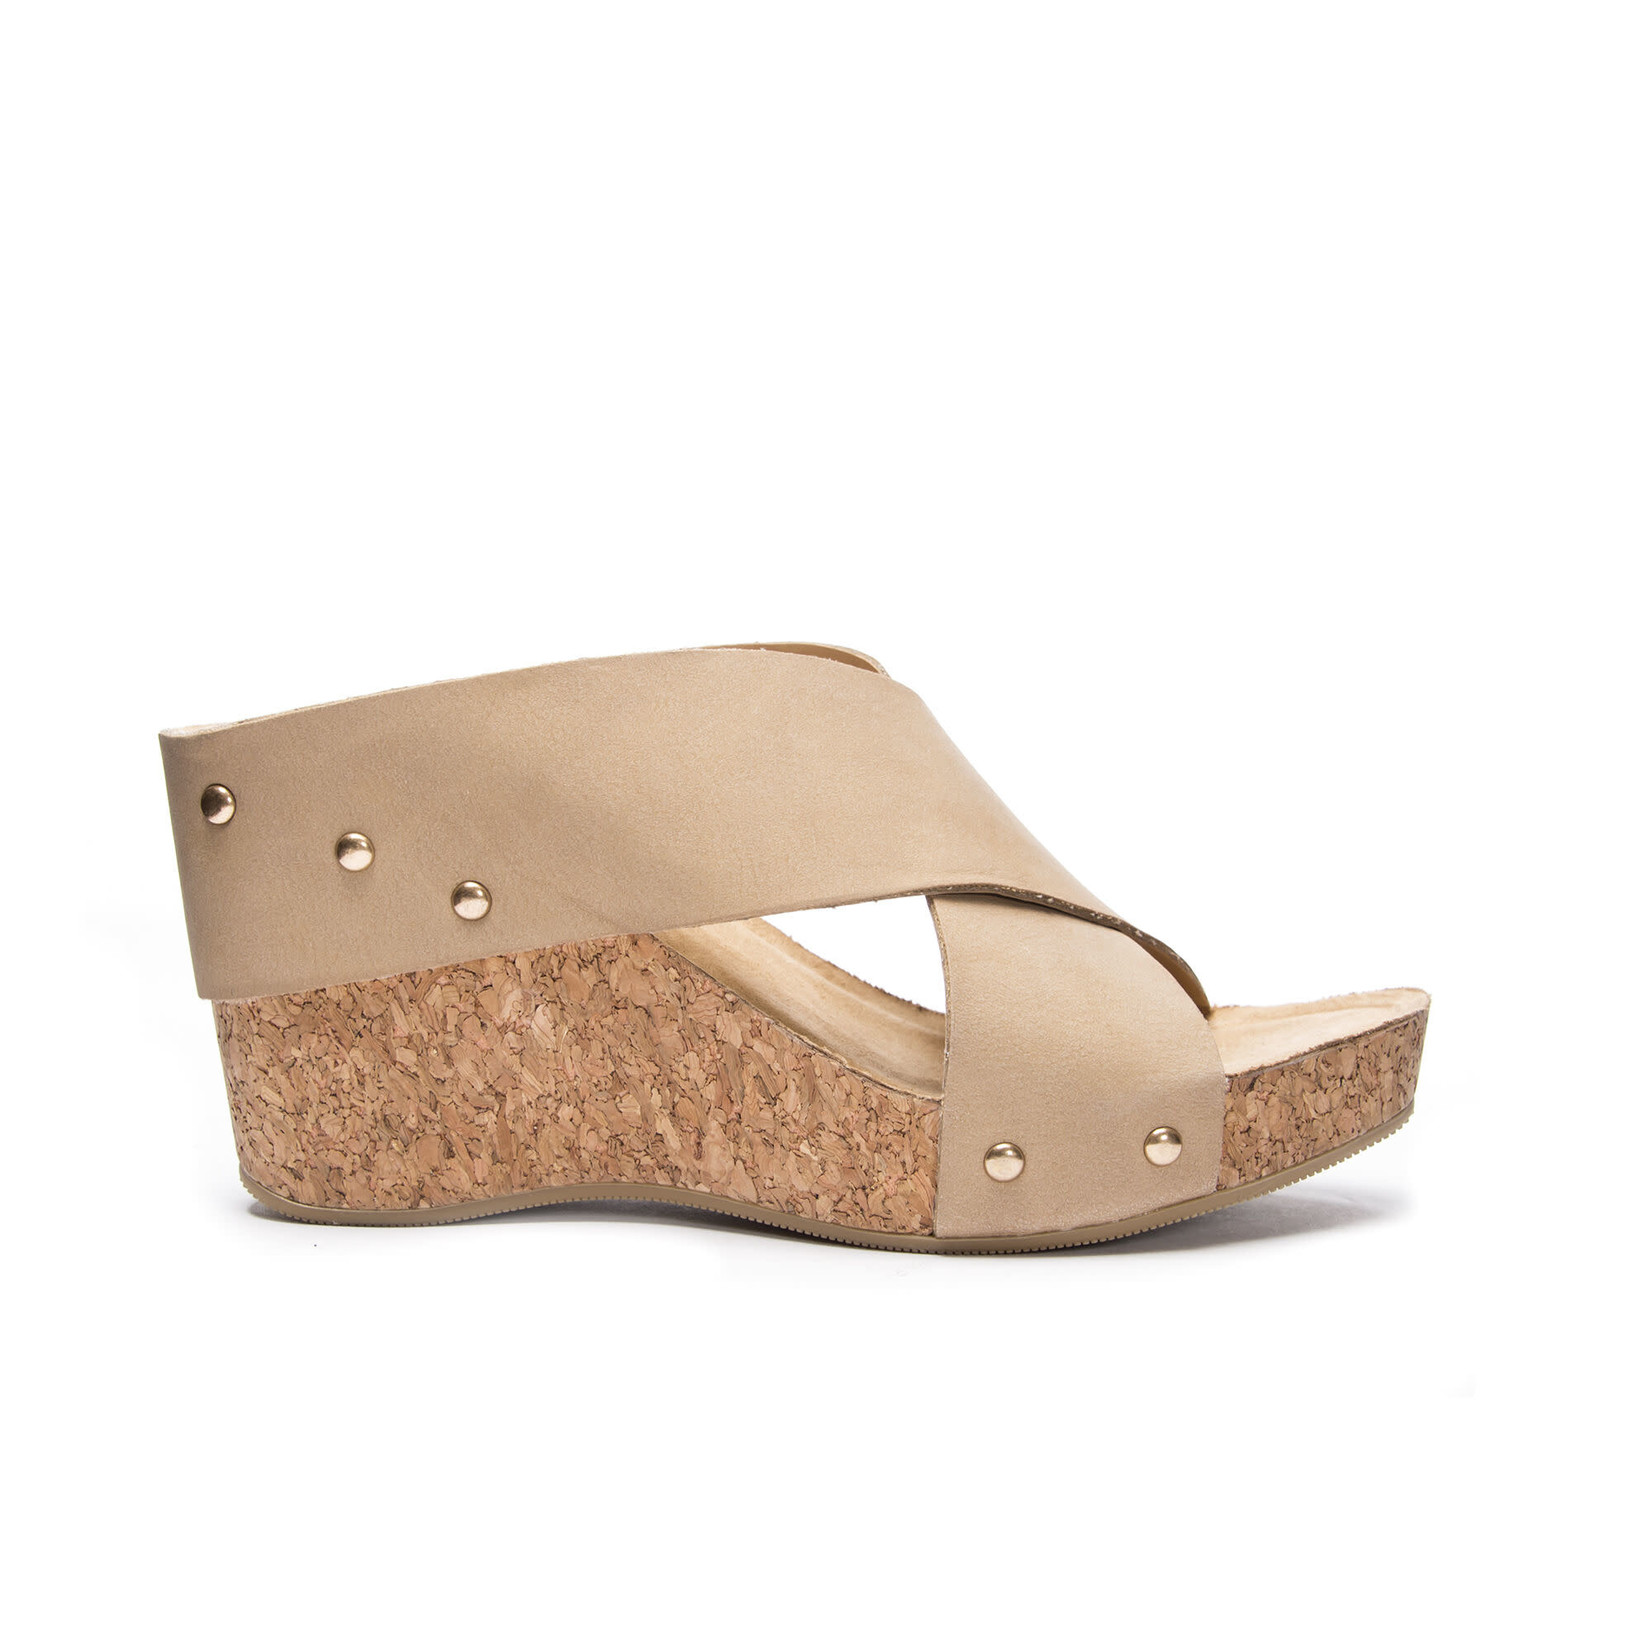 Chinese Laundry Abloom Wedge Sandal